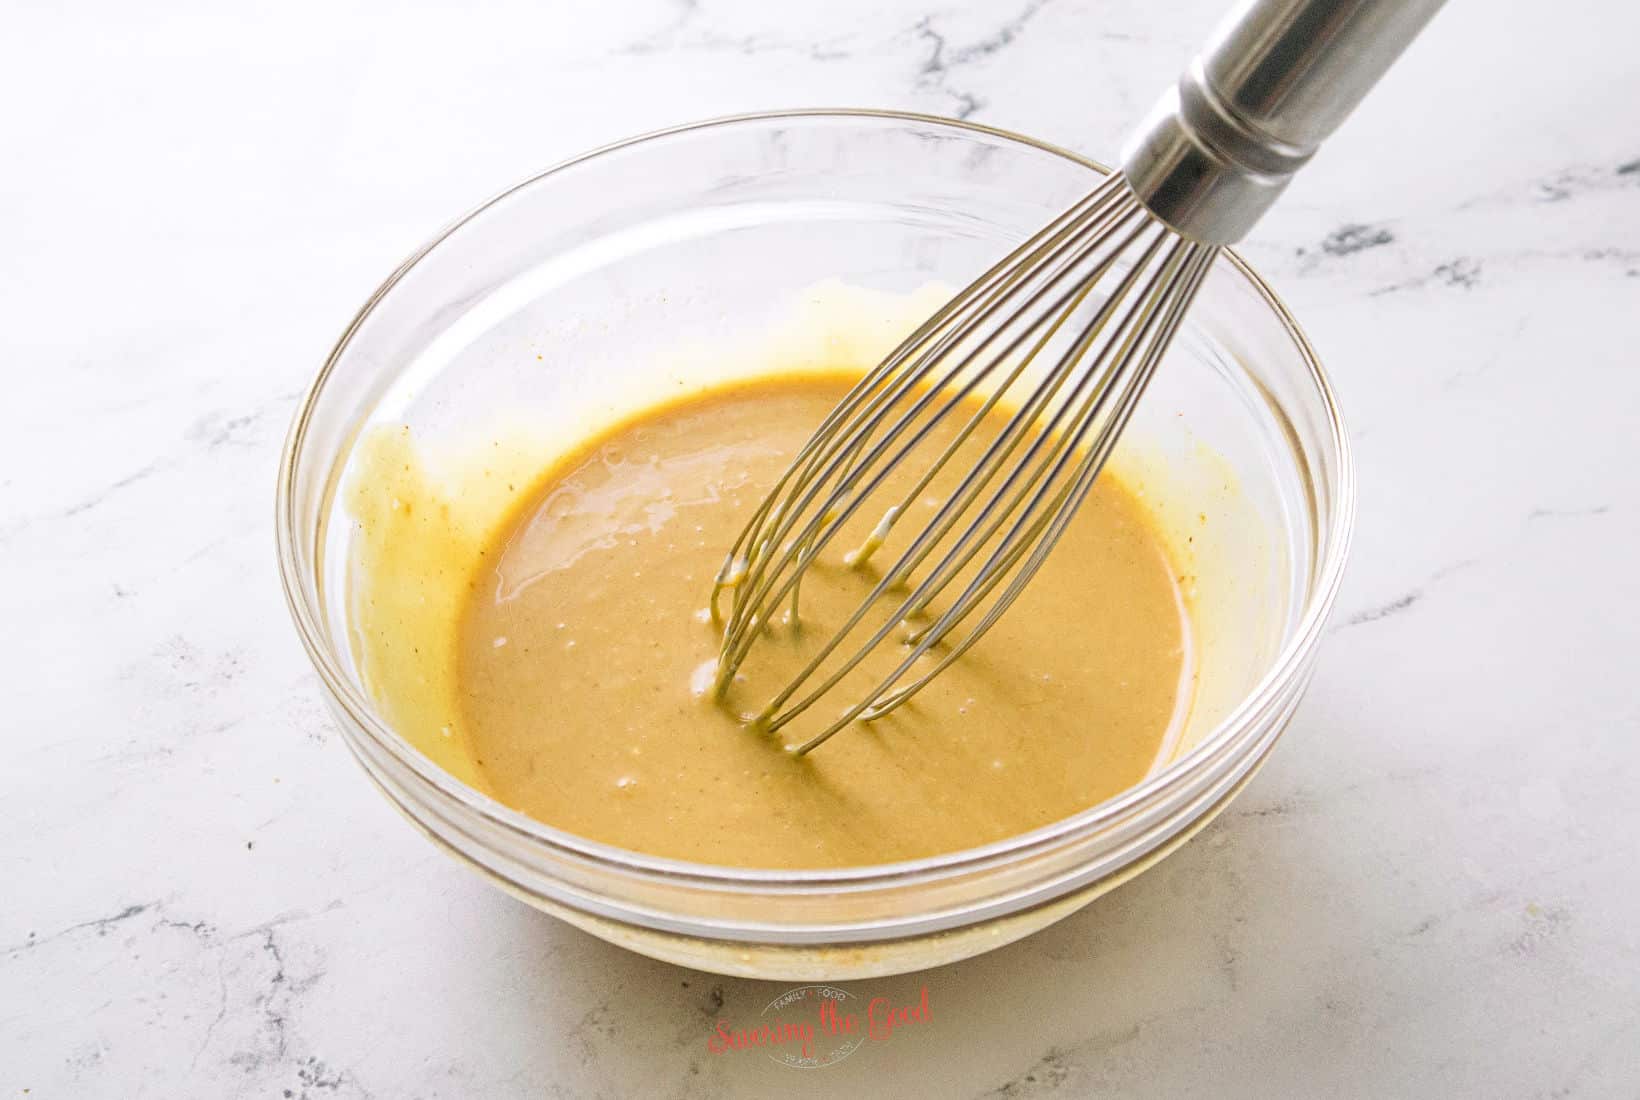 a whisk stirring chick fil a sauce ingredients till blended in a clear glass bowl.